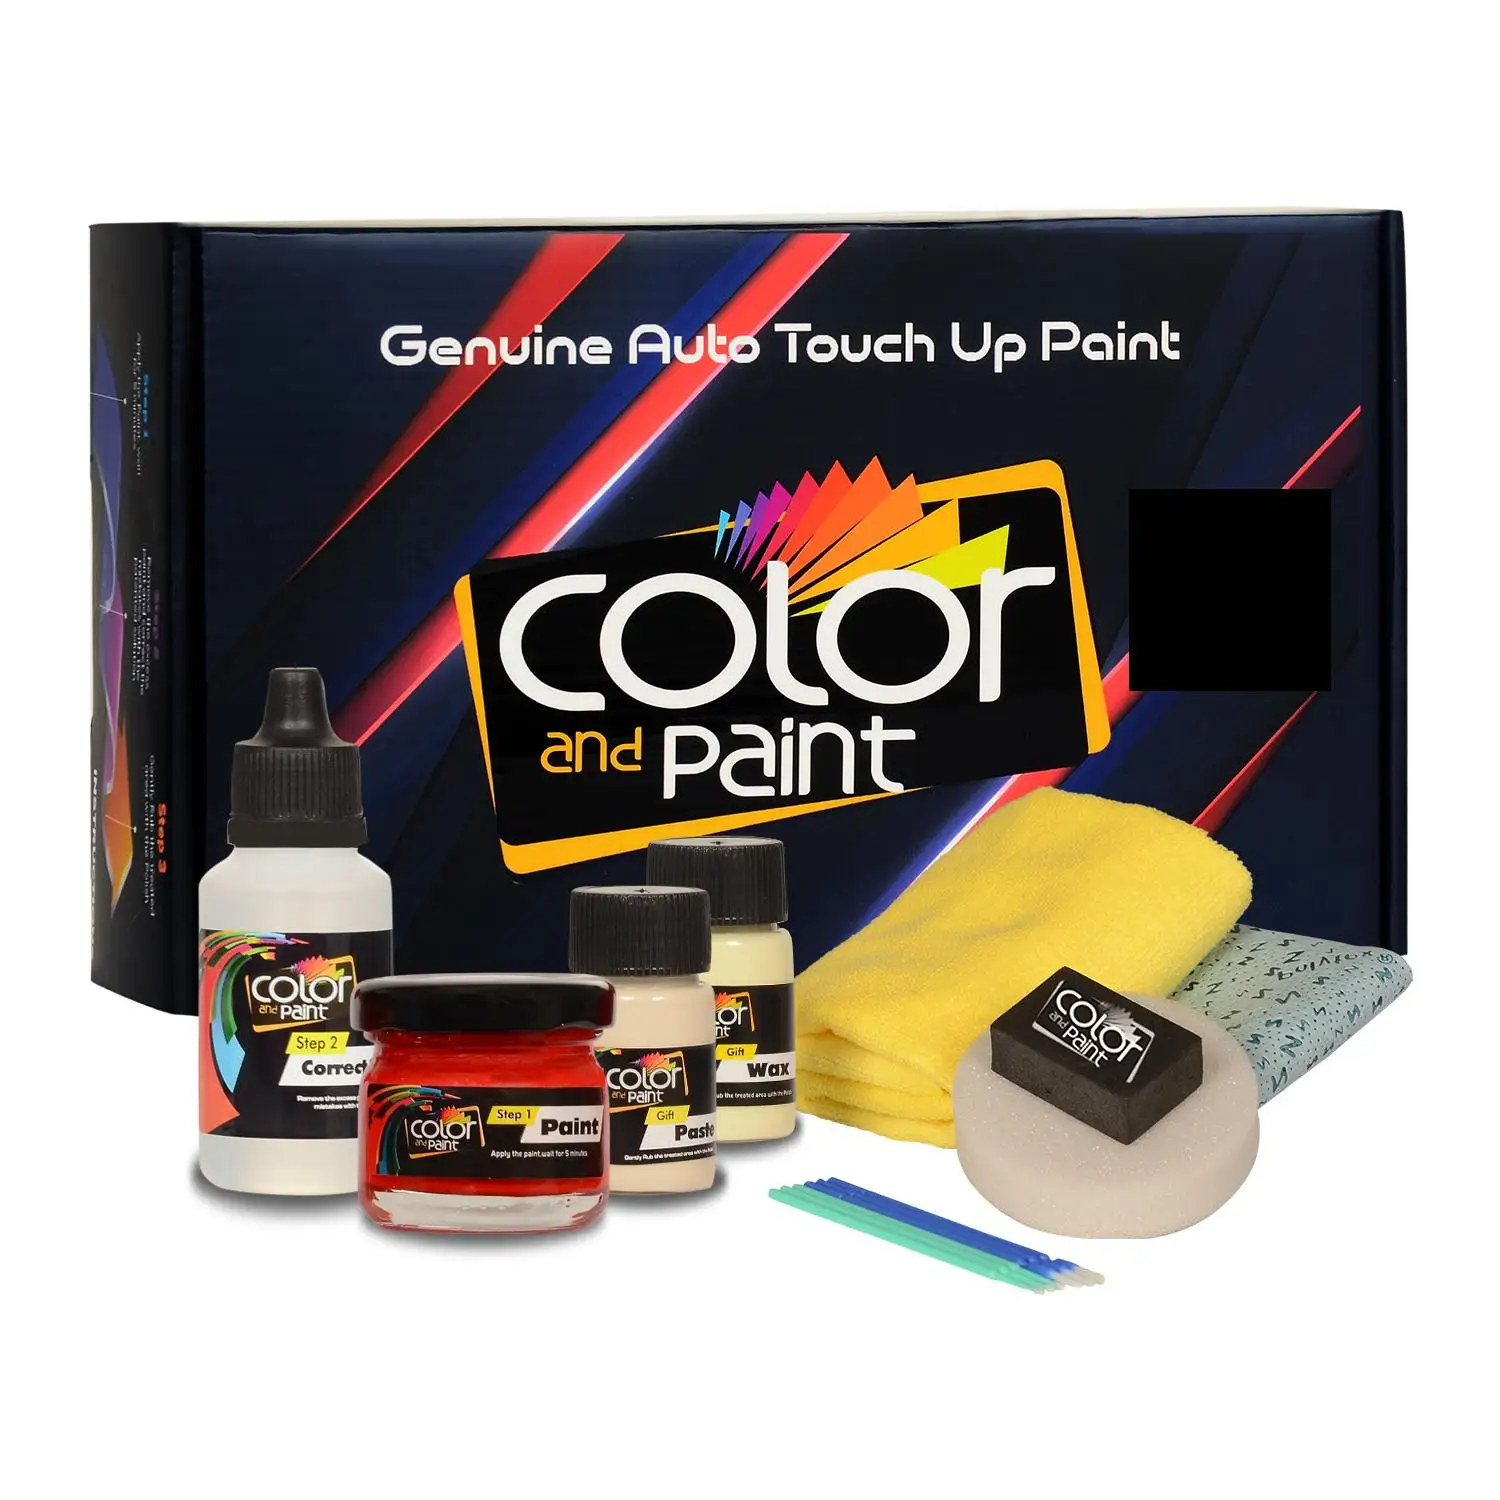 

Color and Paint compatible with Fiat Automotive Touch Up Paint - NERO LUXOR - 601 - Basic Care